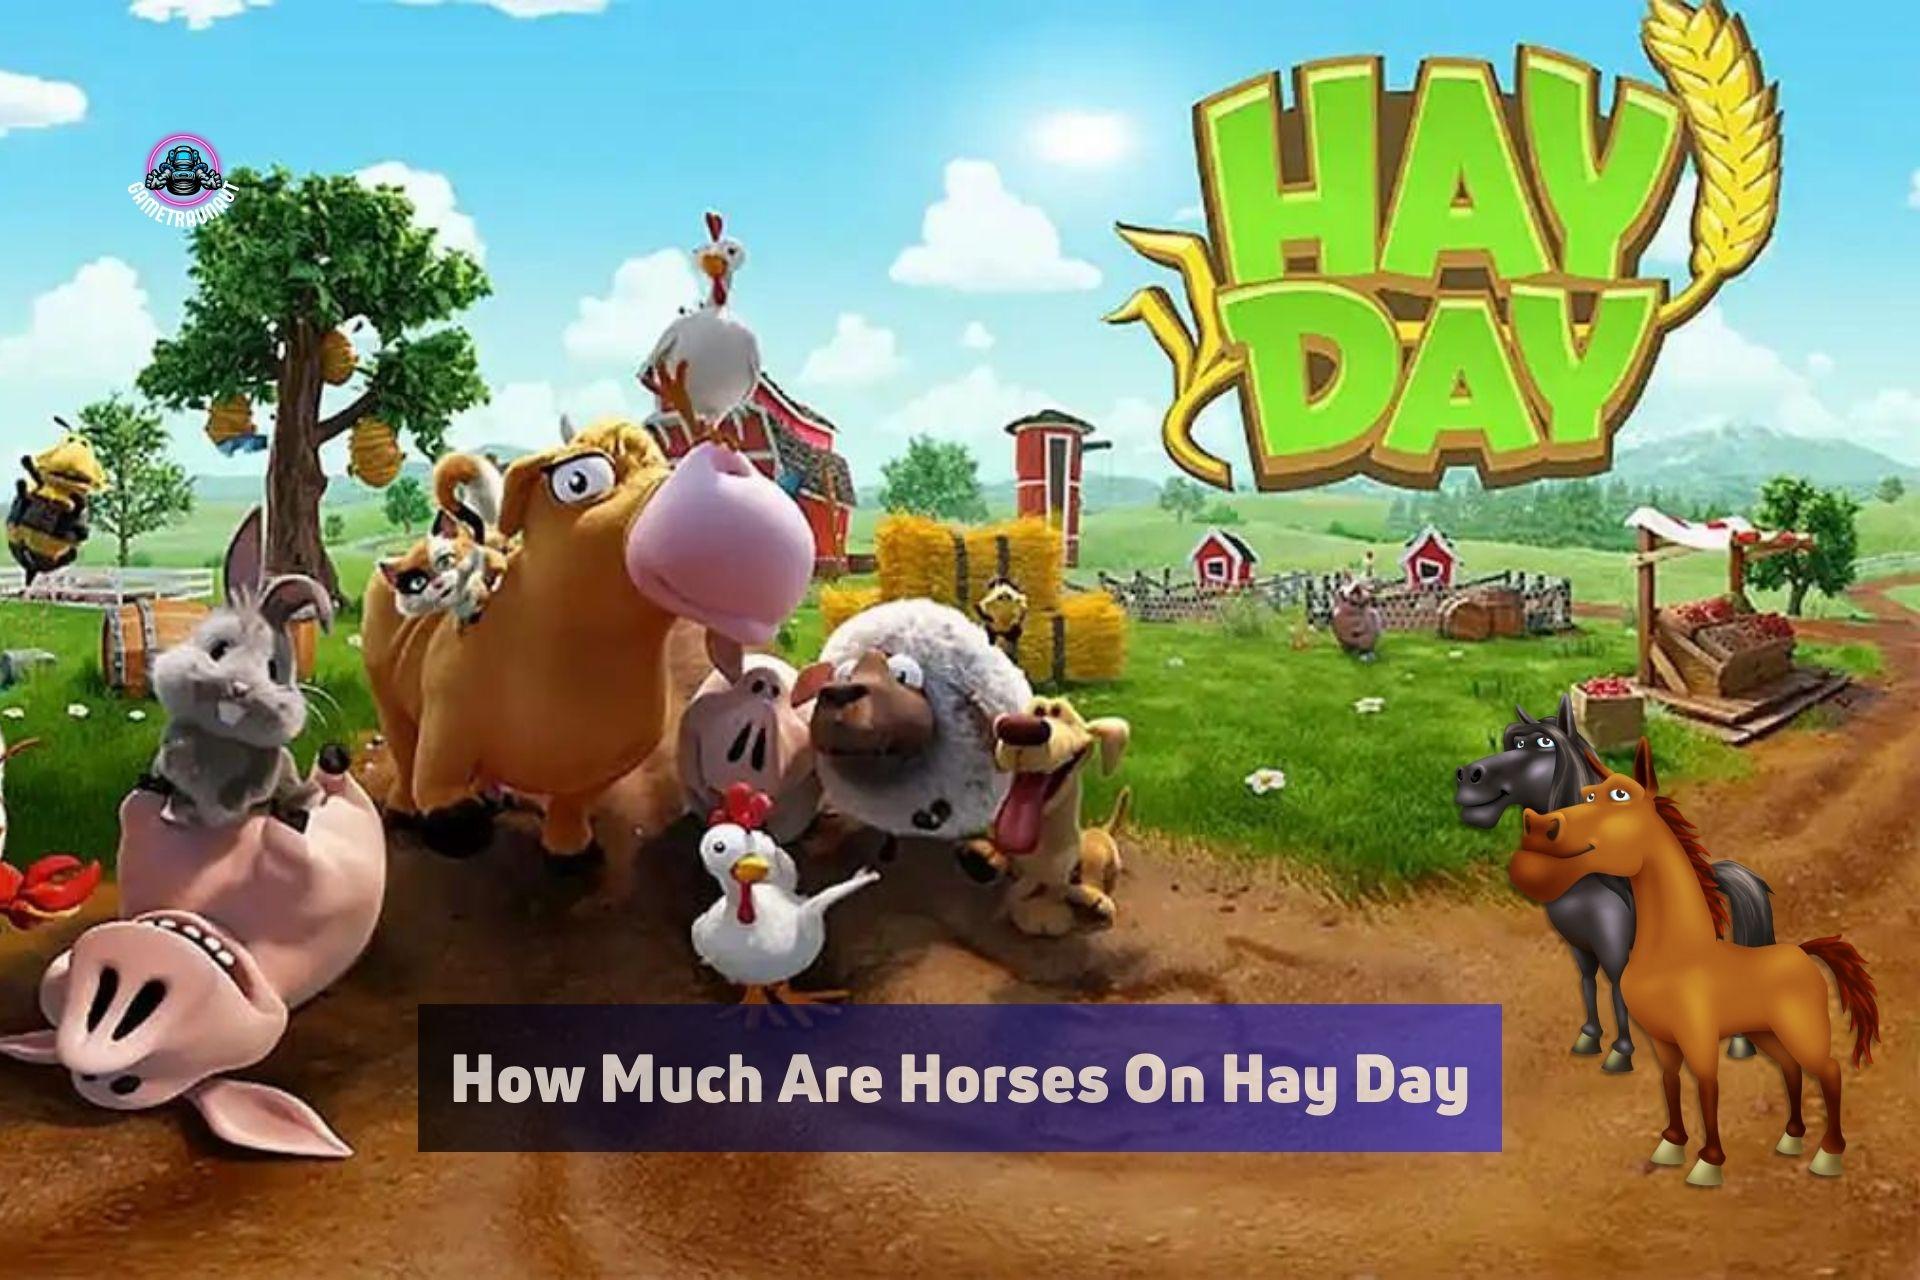 How much are horses on hay day?